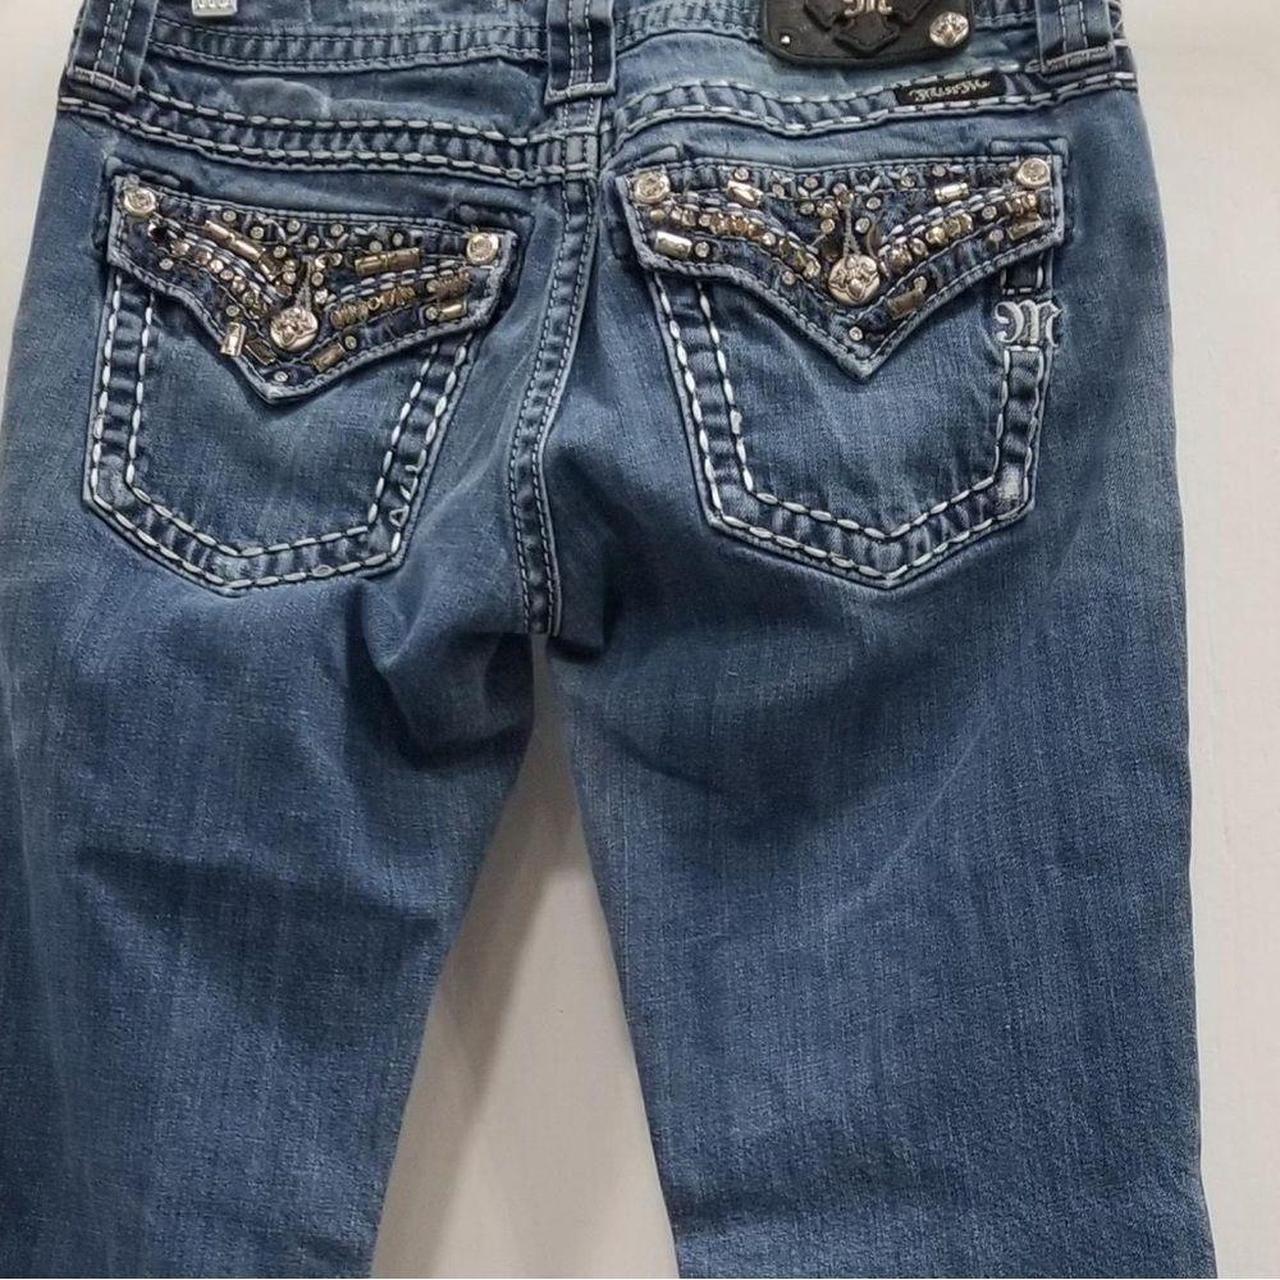 These are well worn jeans in a cute style. The... - Depop